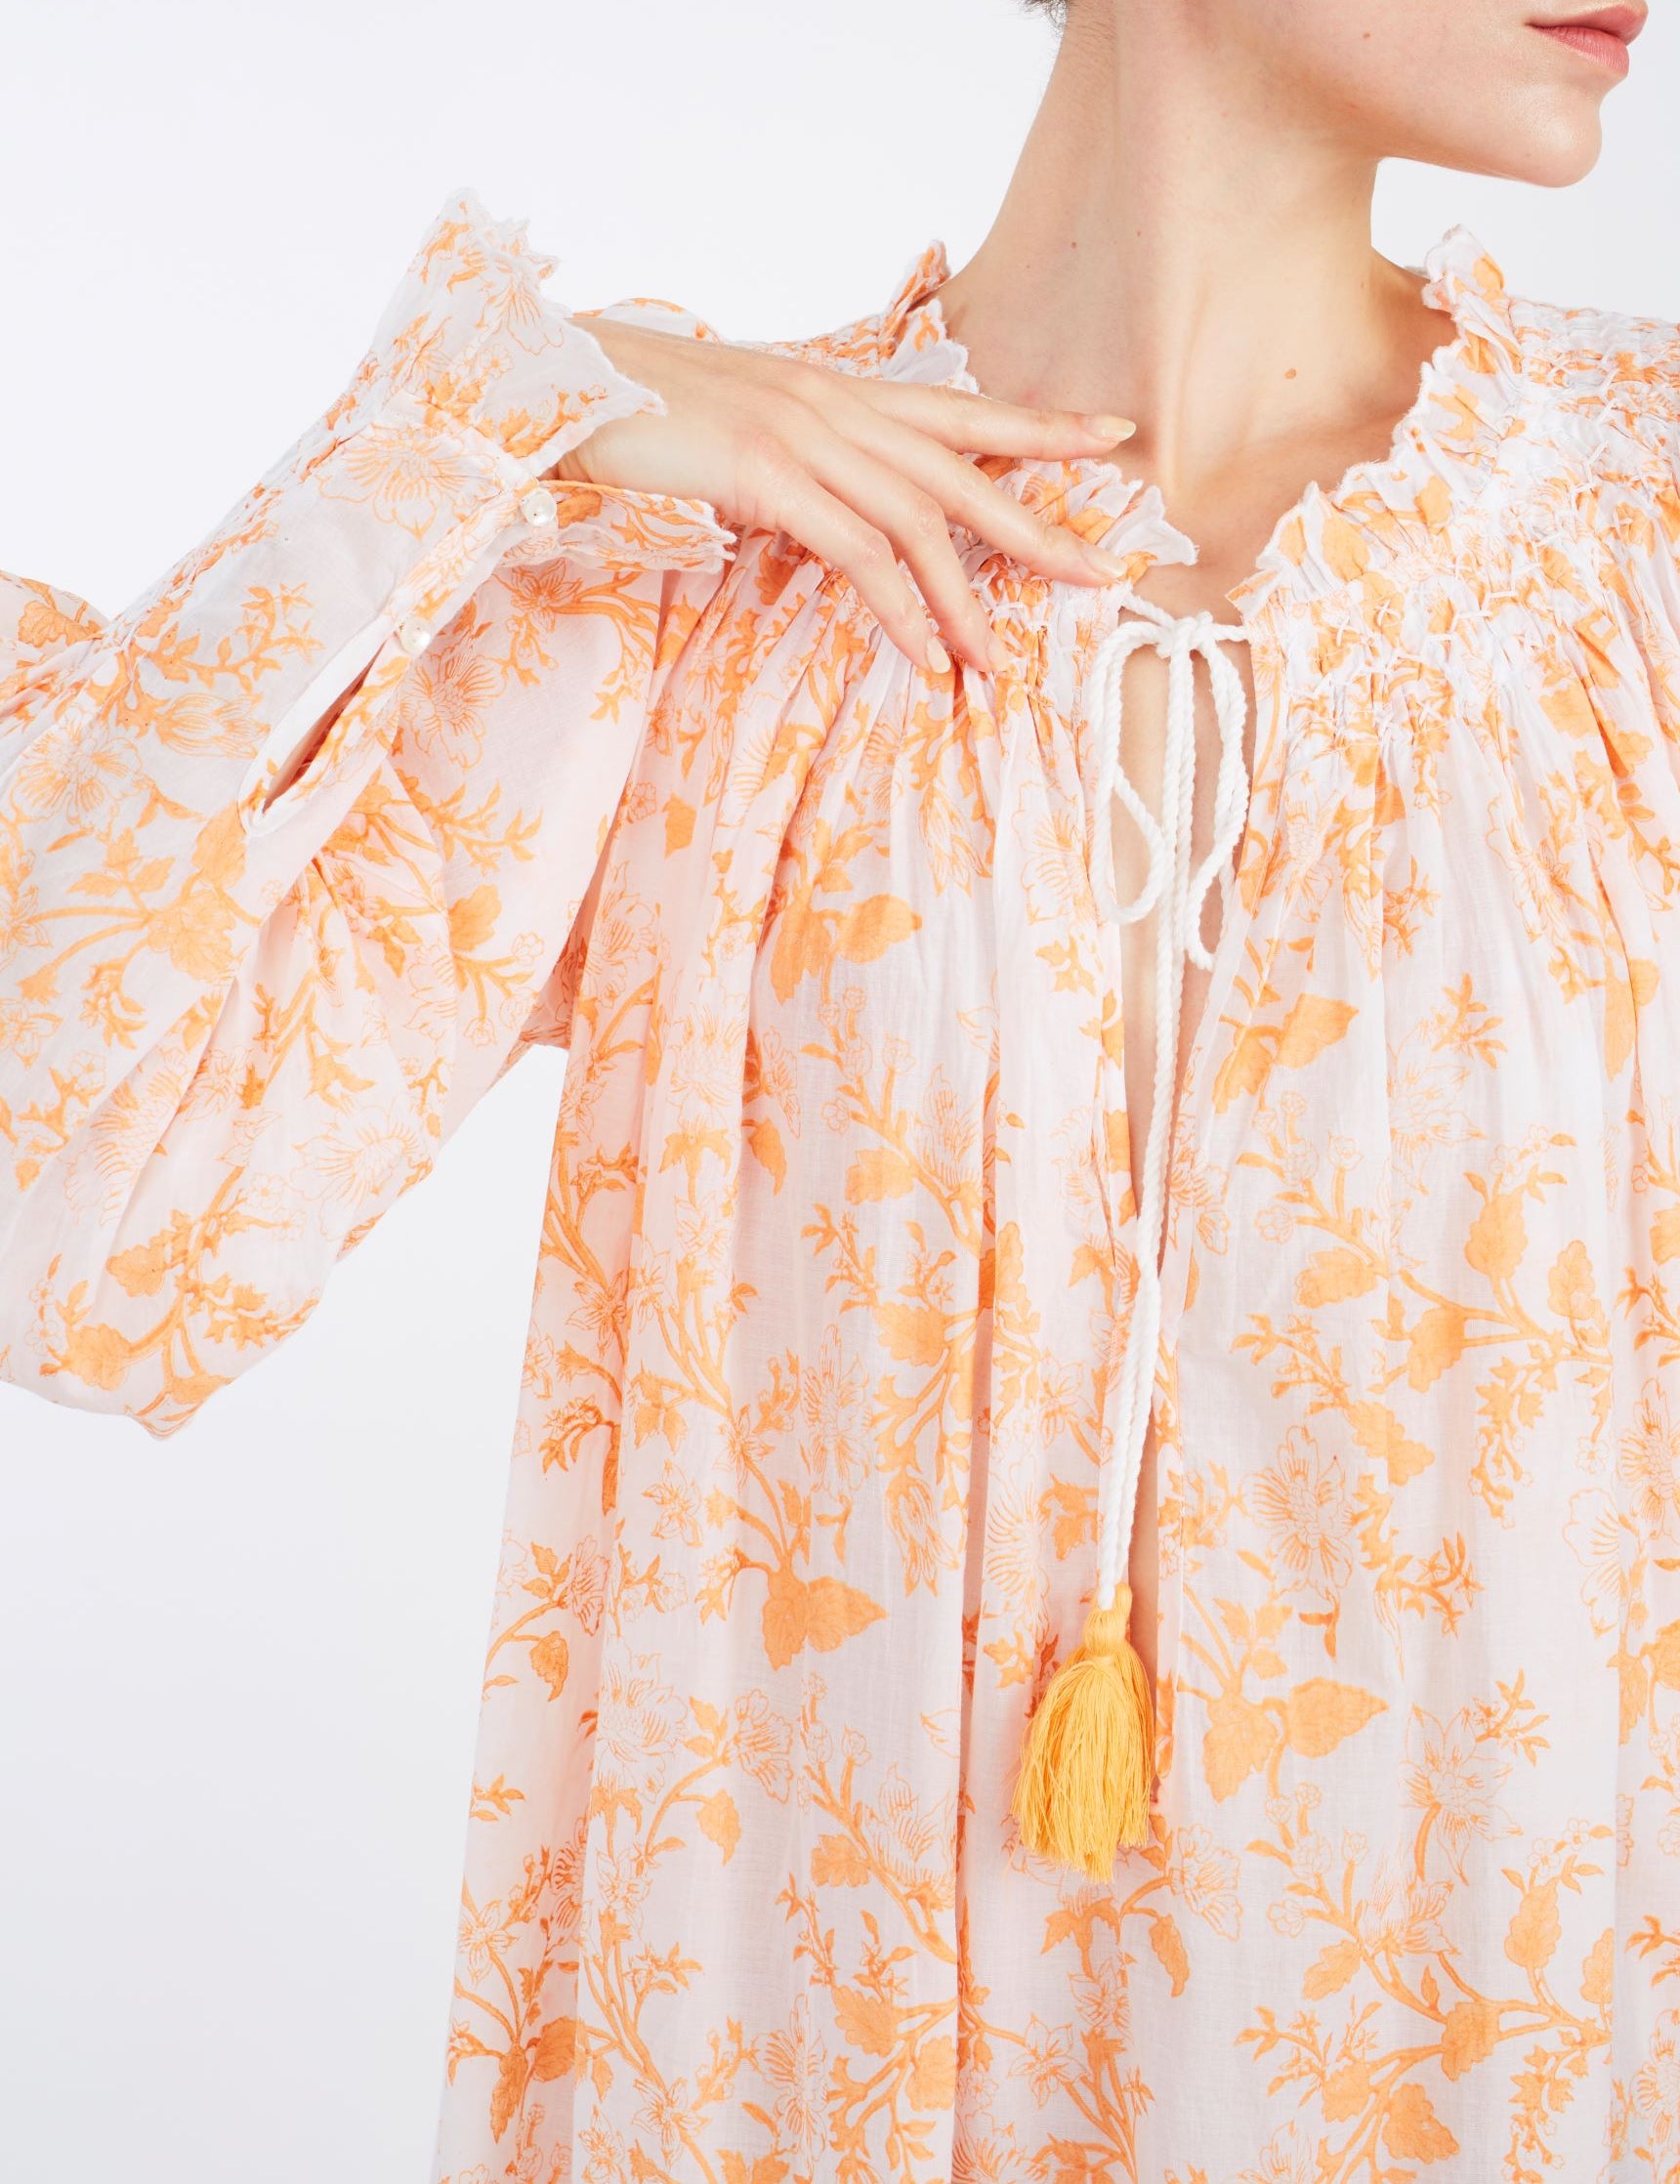 Collar detail of Vladia Chintz Apricot Dress by Thierry Colson